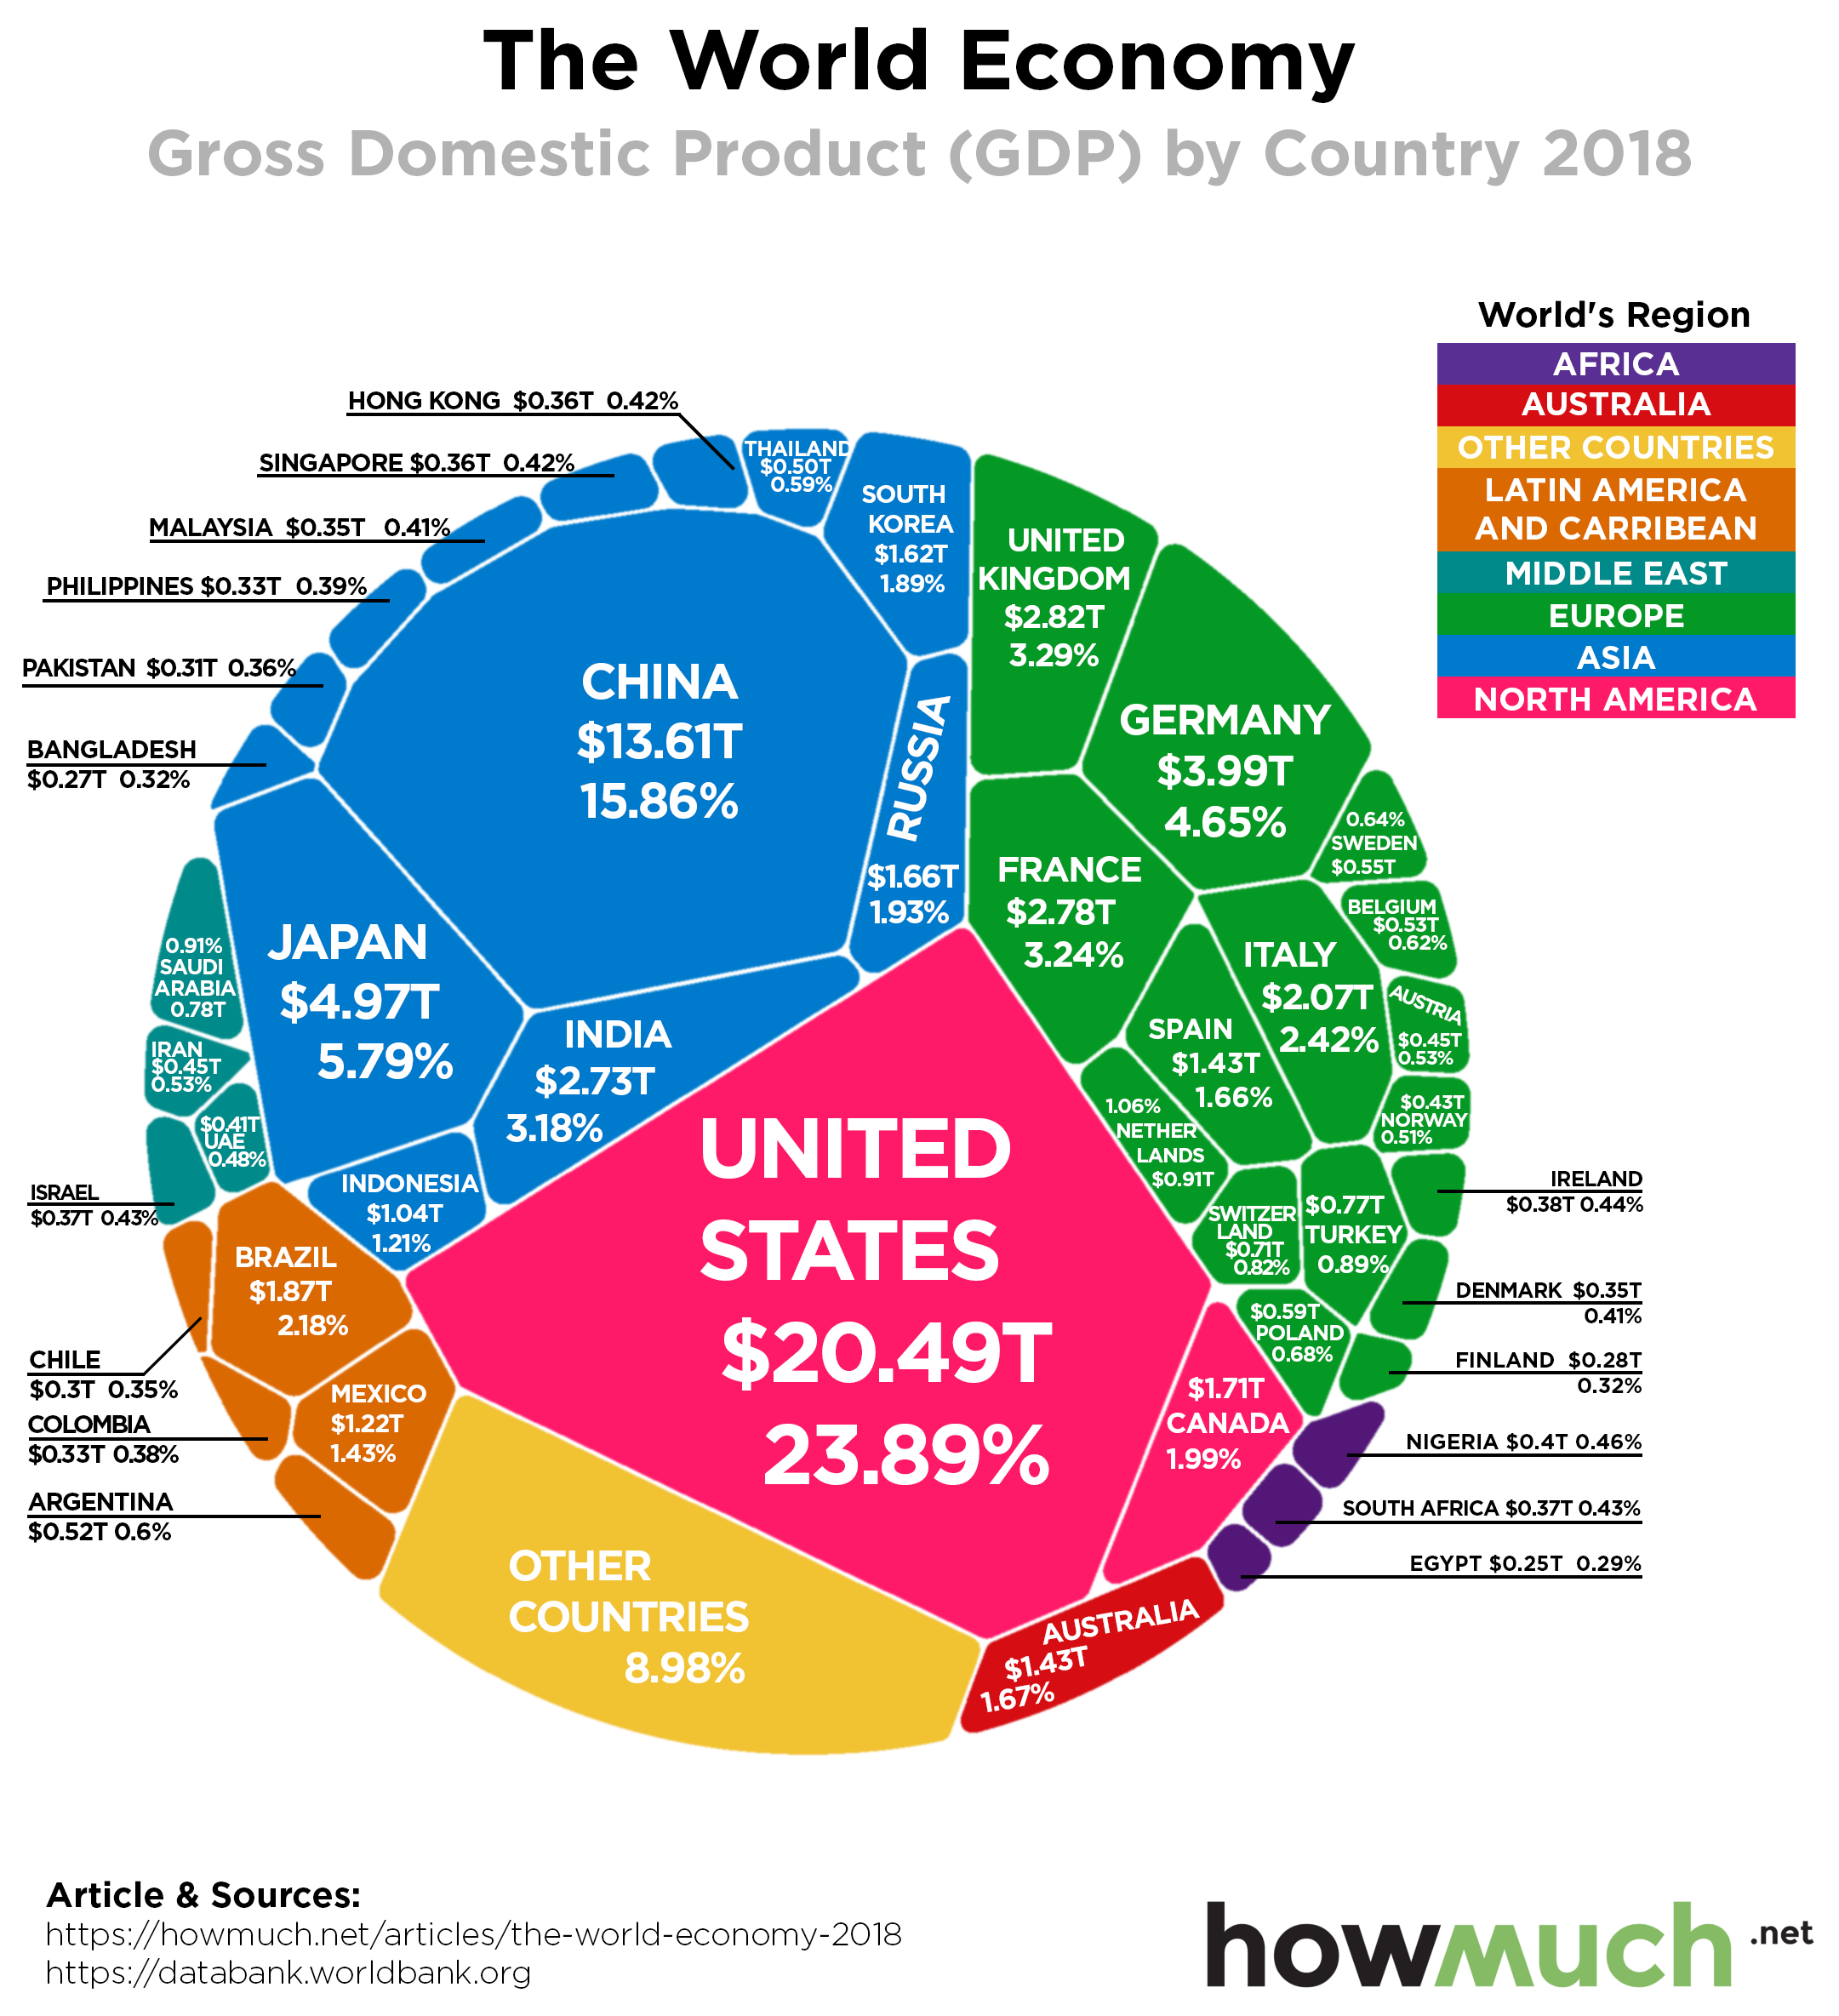 acdn.howmuch.net_articles_GDP_World_2018__81a3.png